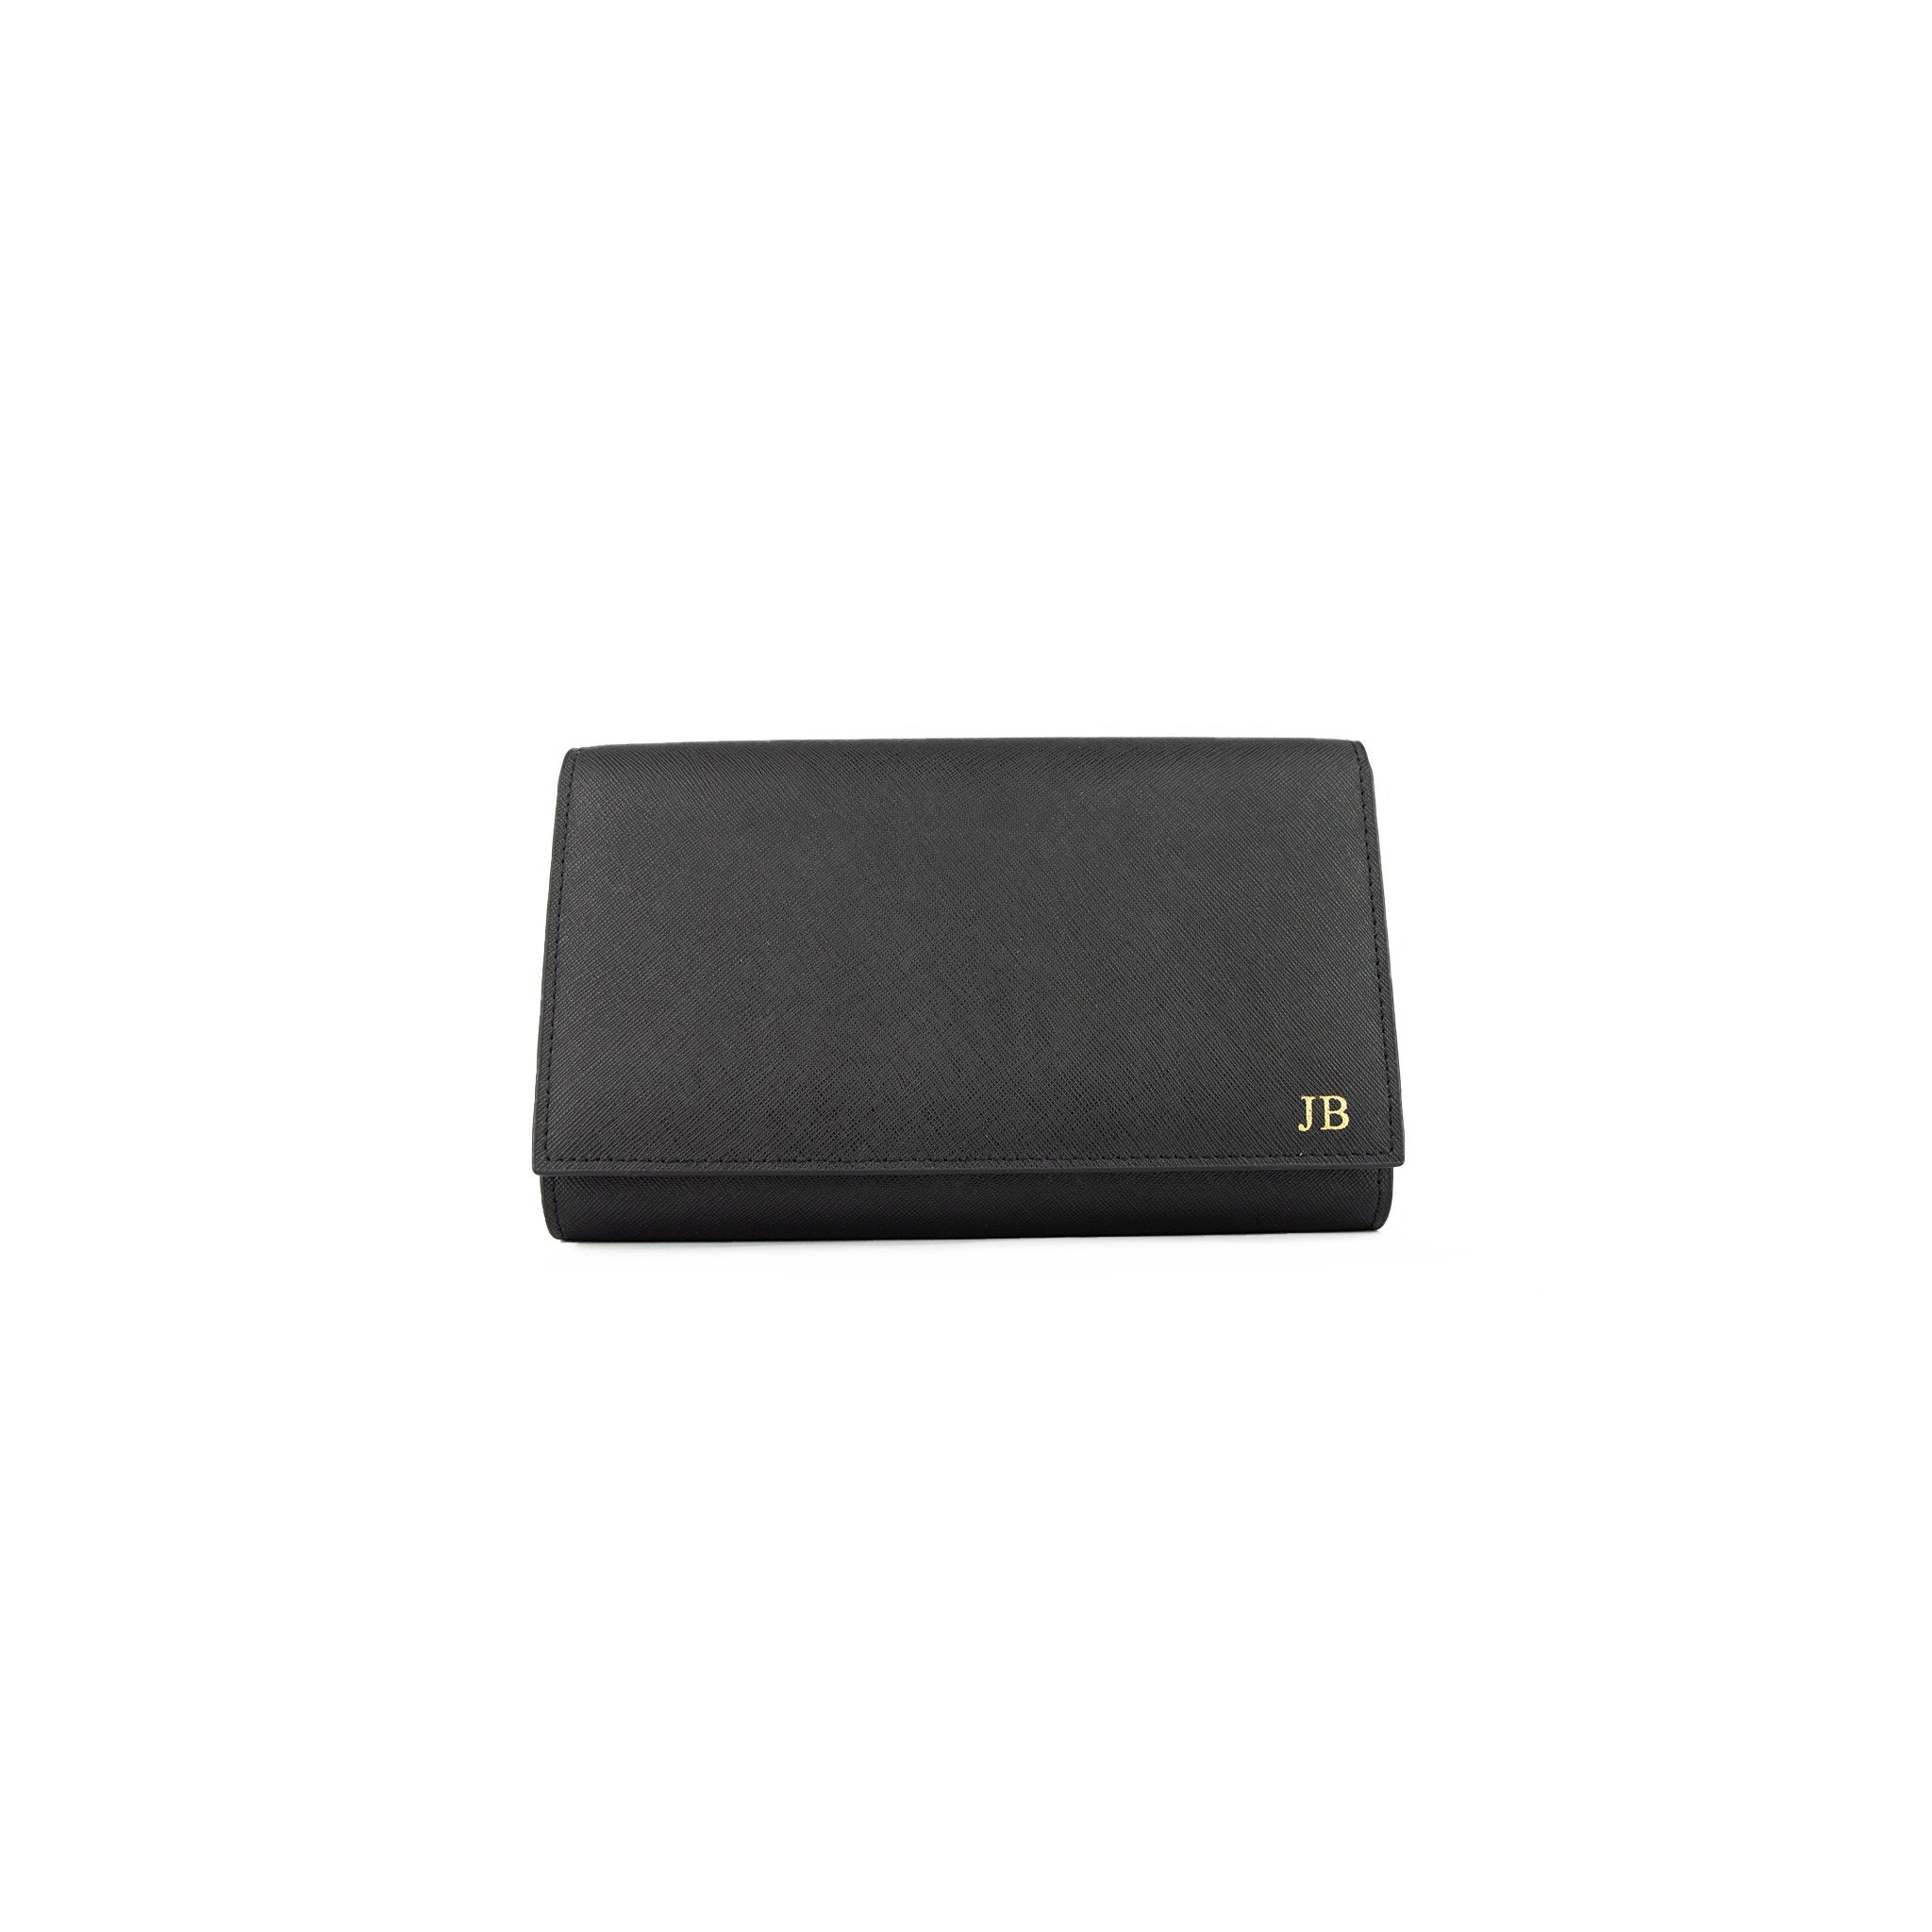 Personalised Black Monogrammed Saffiano Leather Travel Document Holder / Clutch Bag